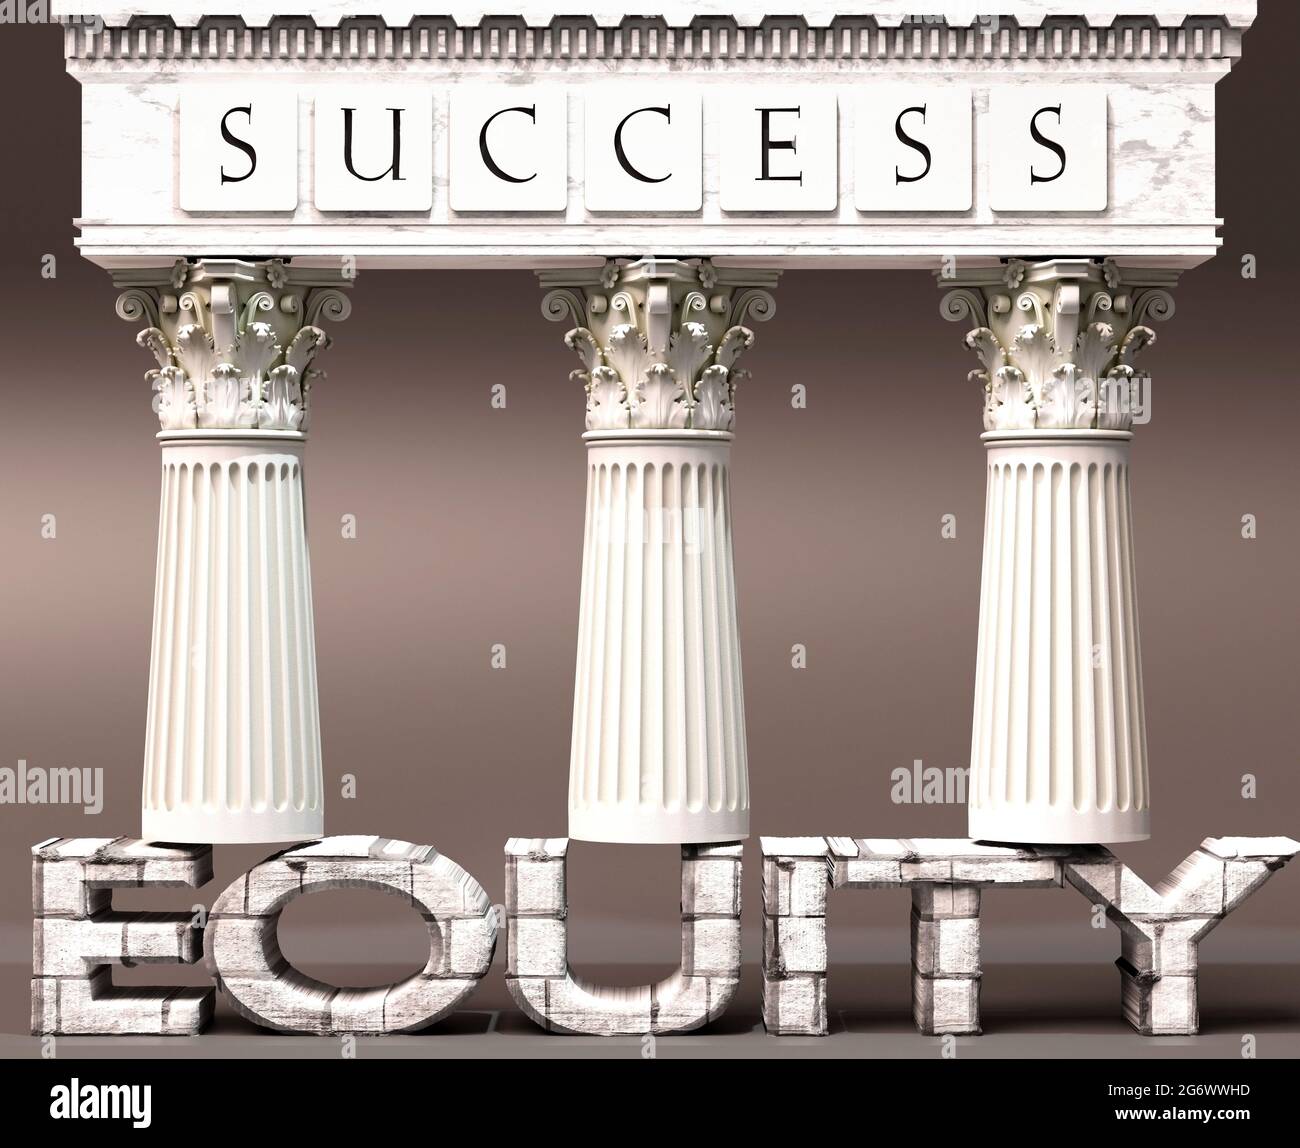 Equity as a foundation of success - symbolized by pillars of success supported by Equity to show that it is essential for reaching goals and achieveme Stock Photo